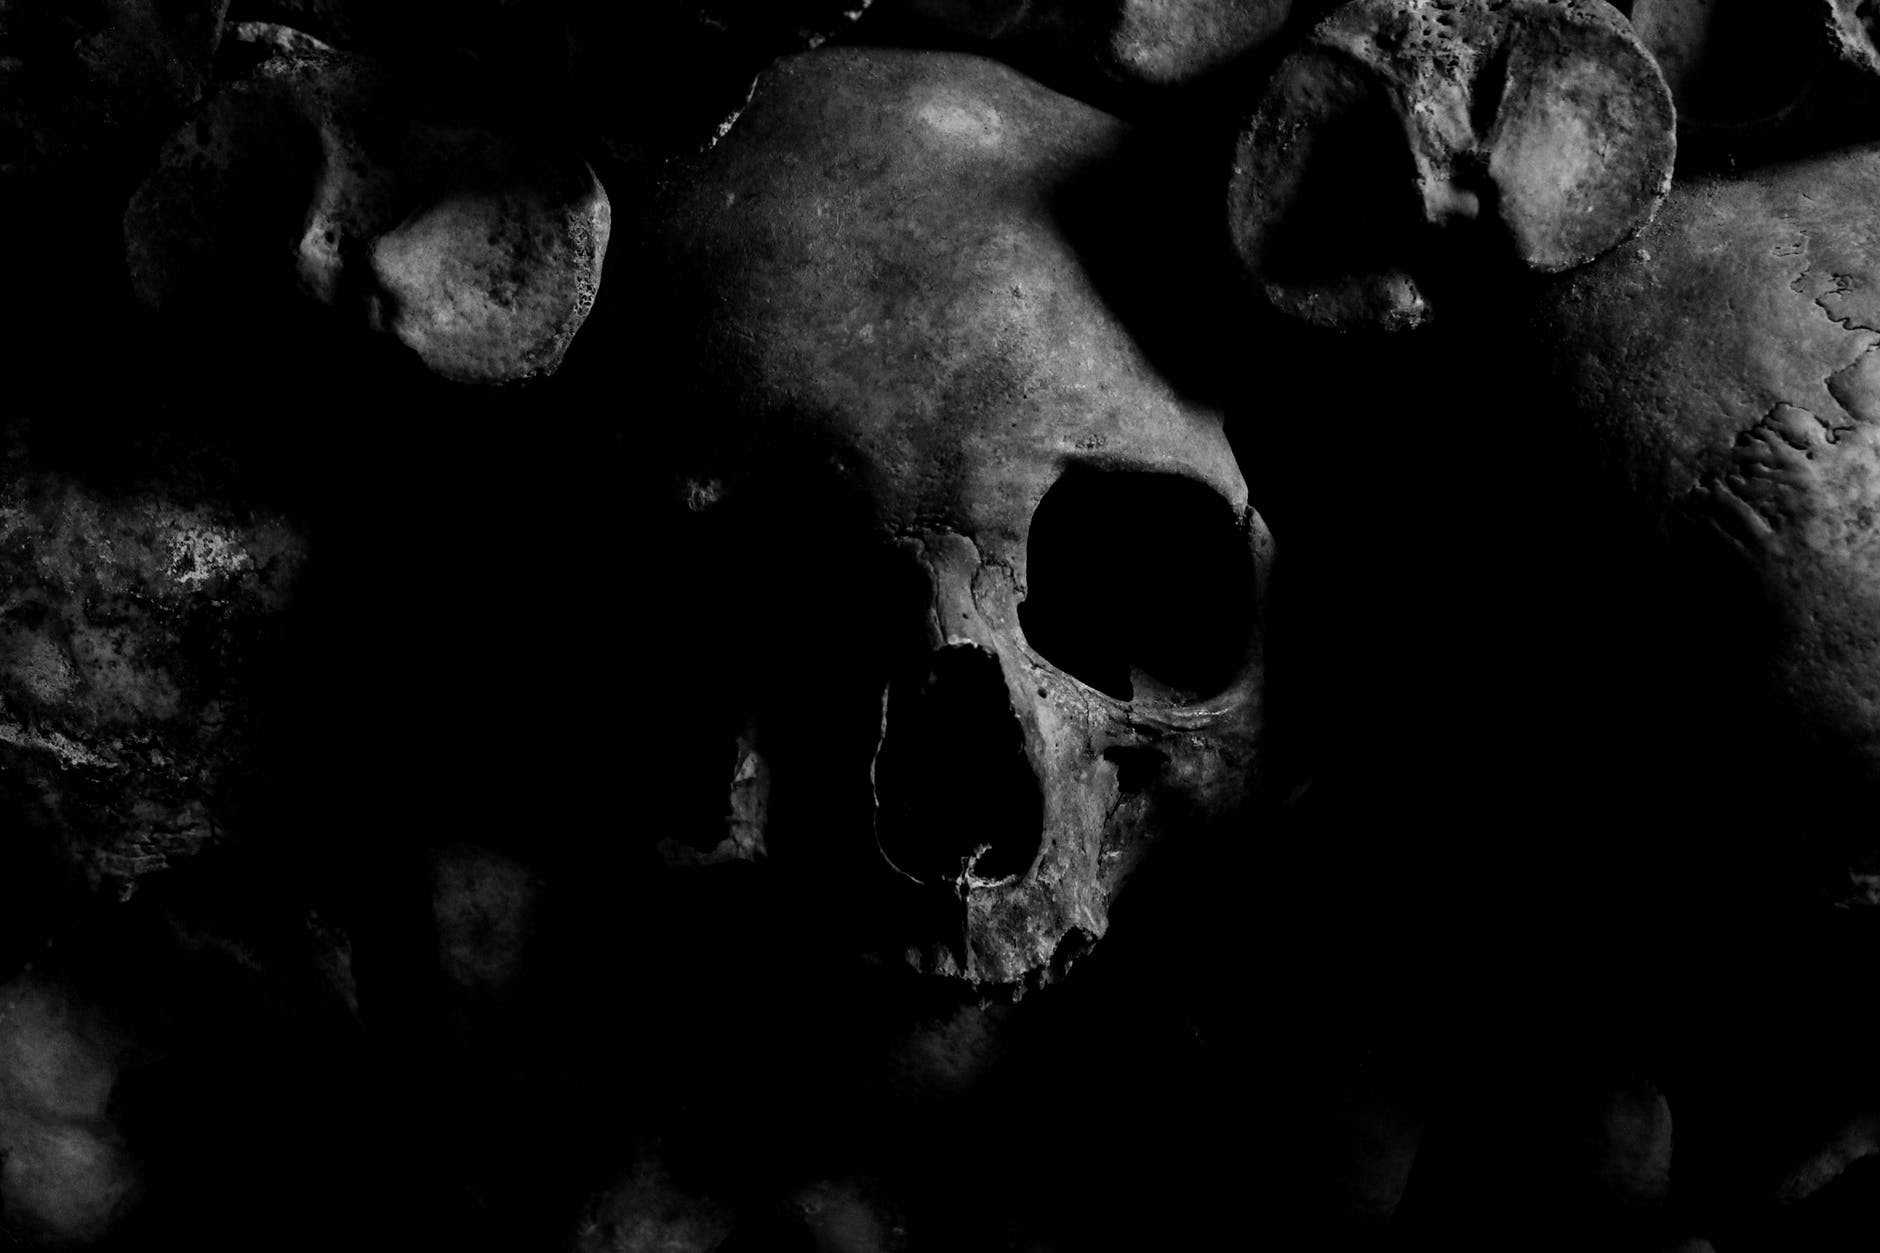 An image of a skull on the ground representing the dead bodies in Beyond Evil